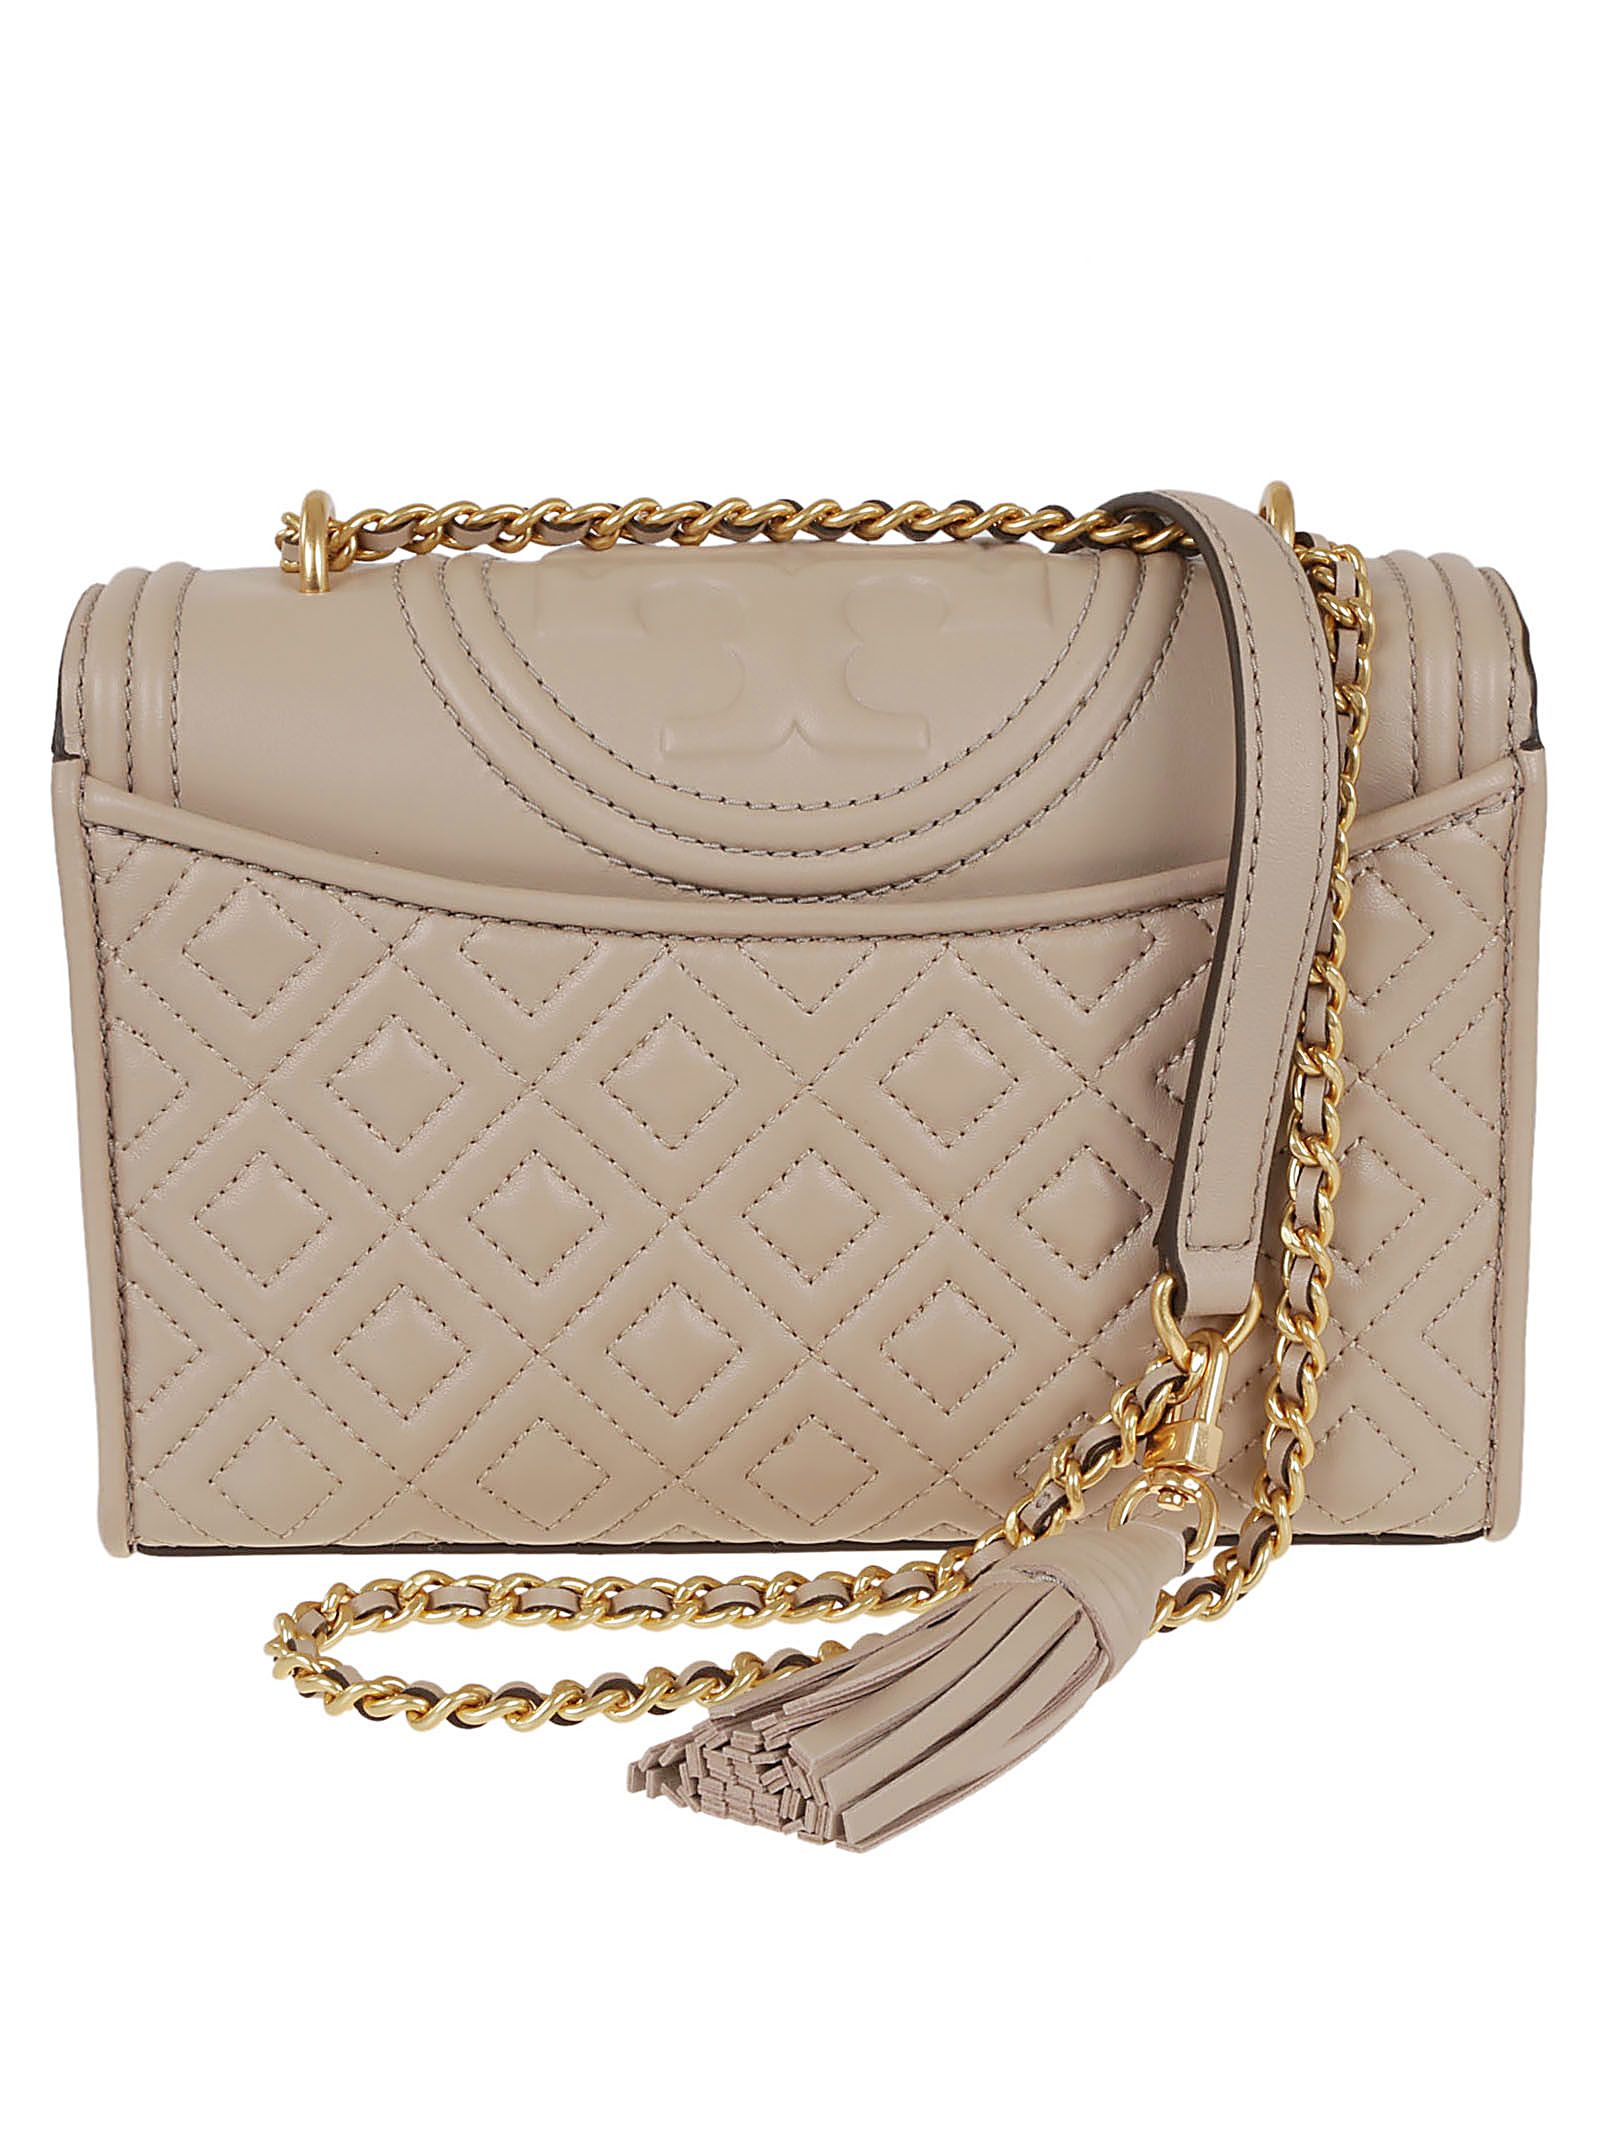 Tory Burch Tory Burch Fleming Small Quilted Shoulder Bag - Light Taupe ...